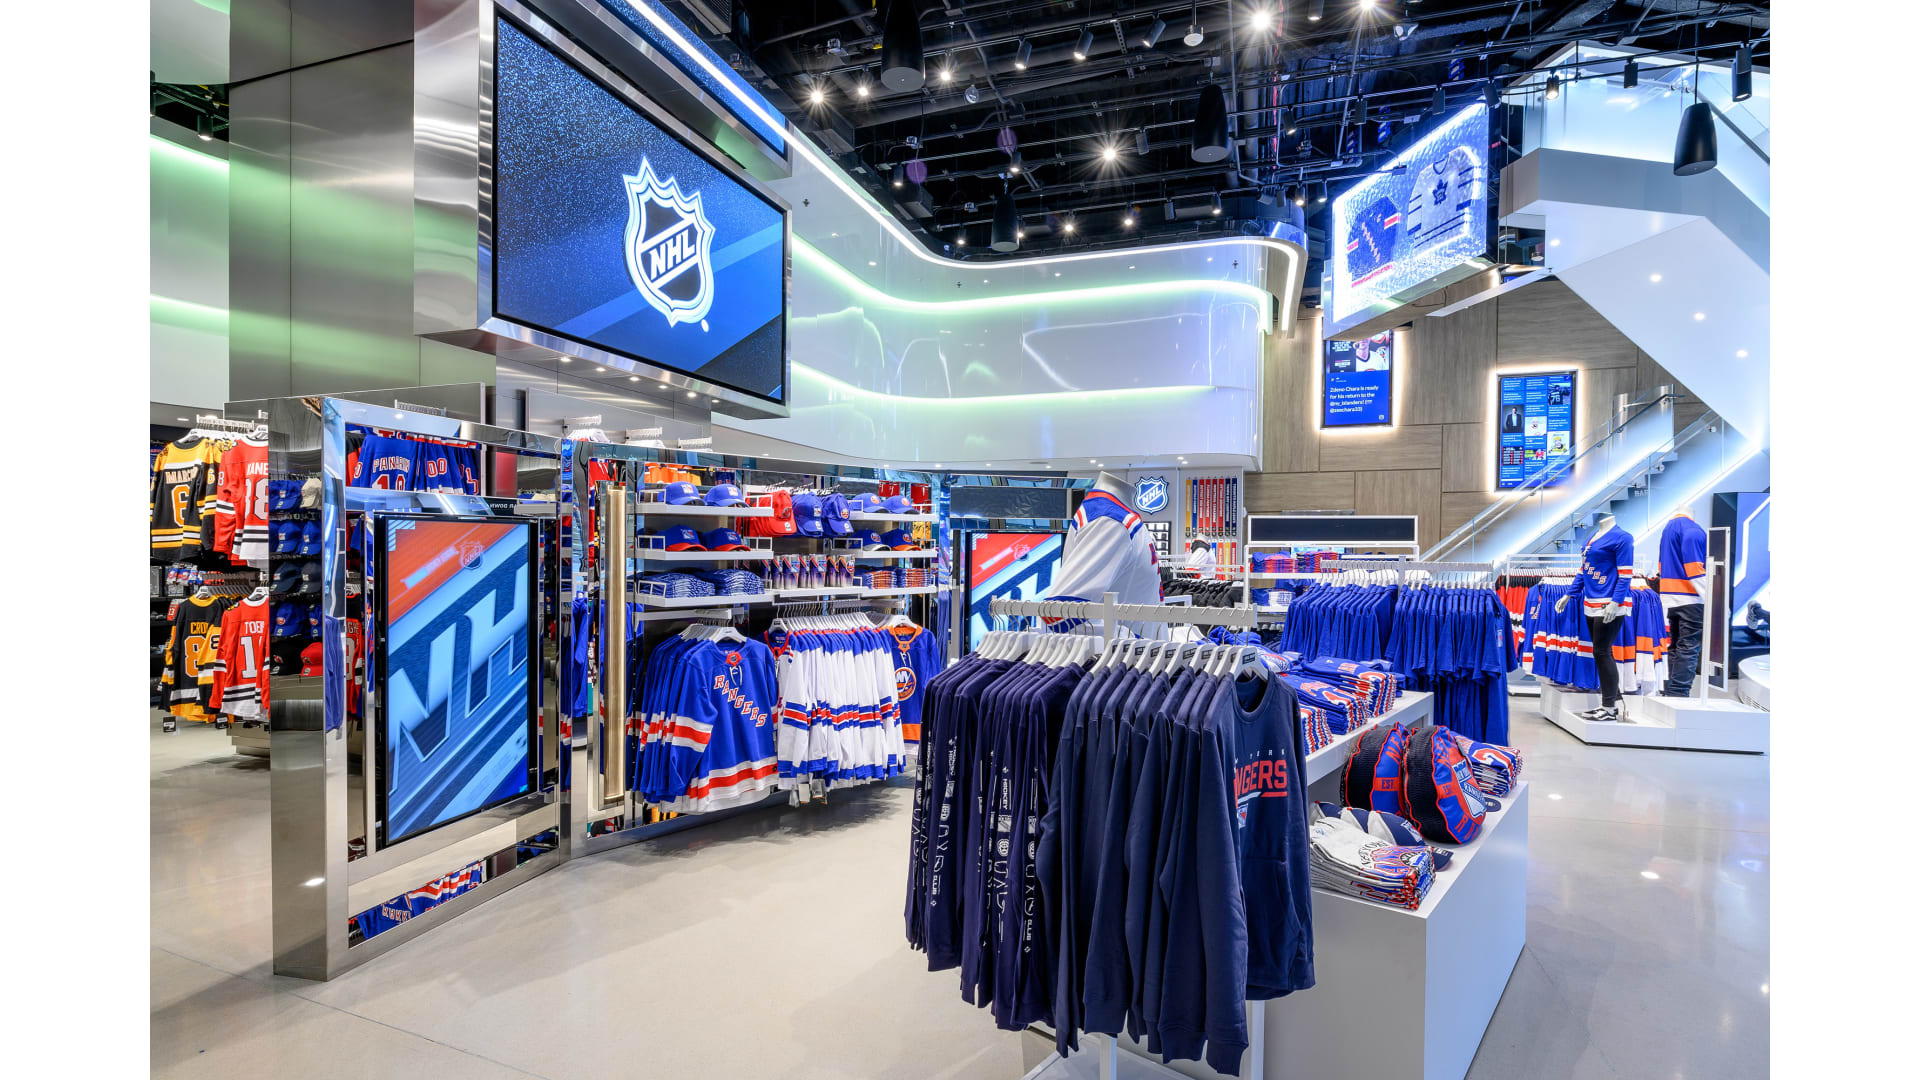 NHL Shop NYC - The all-new NHL Shop flagship store in New York